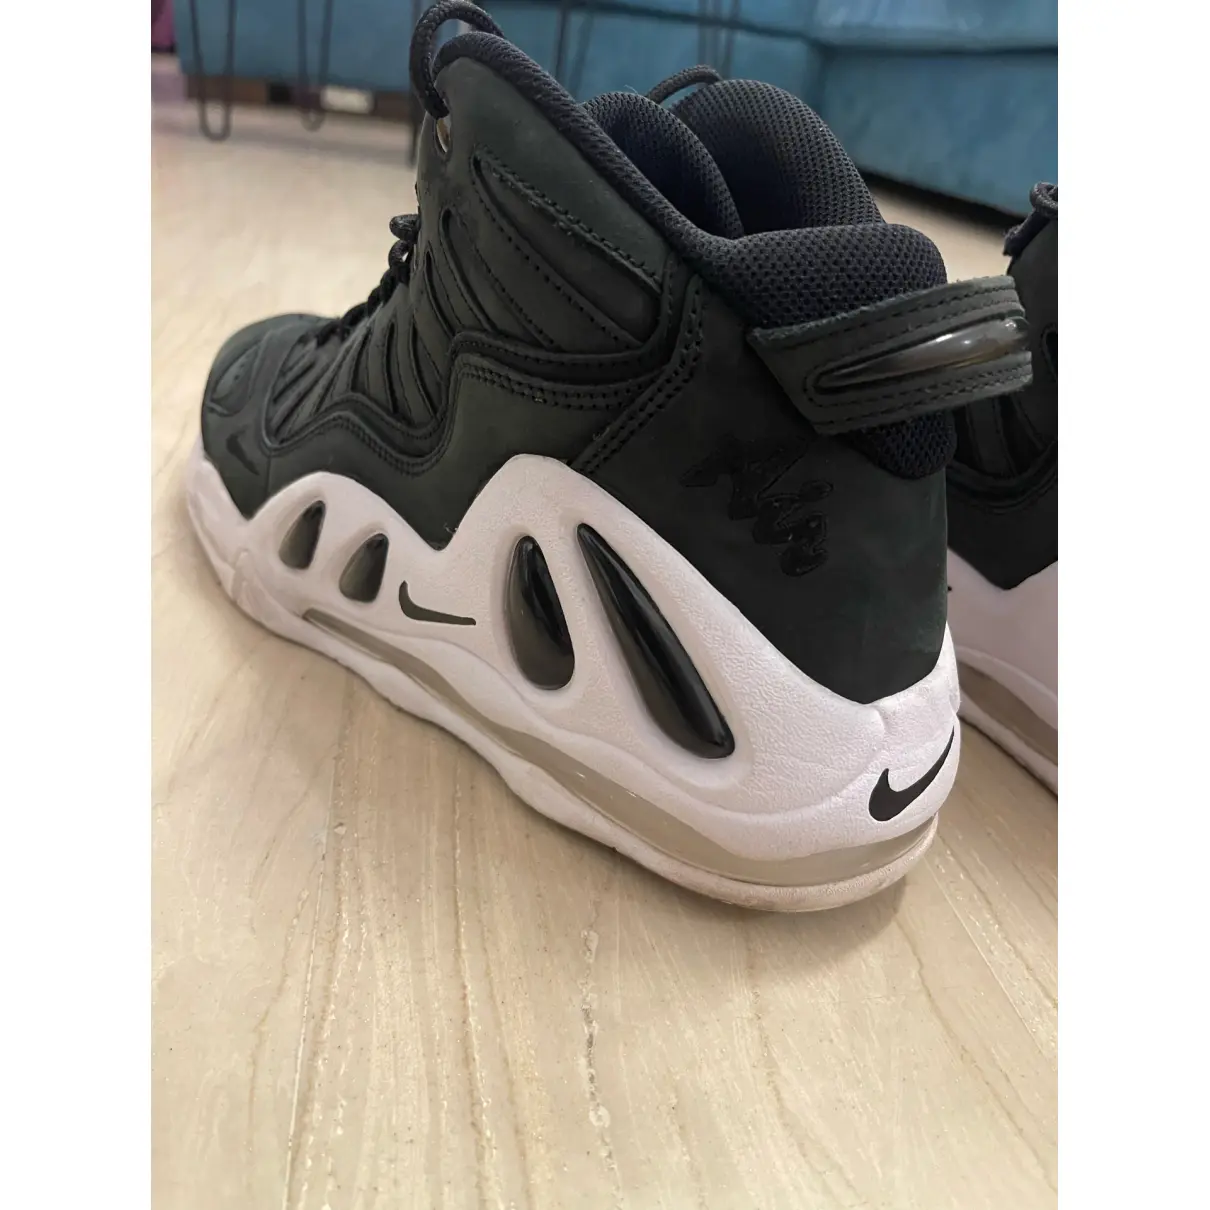 Air More Uptempo 97 high trainers Nike